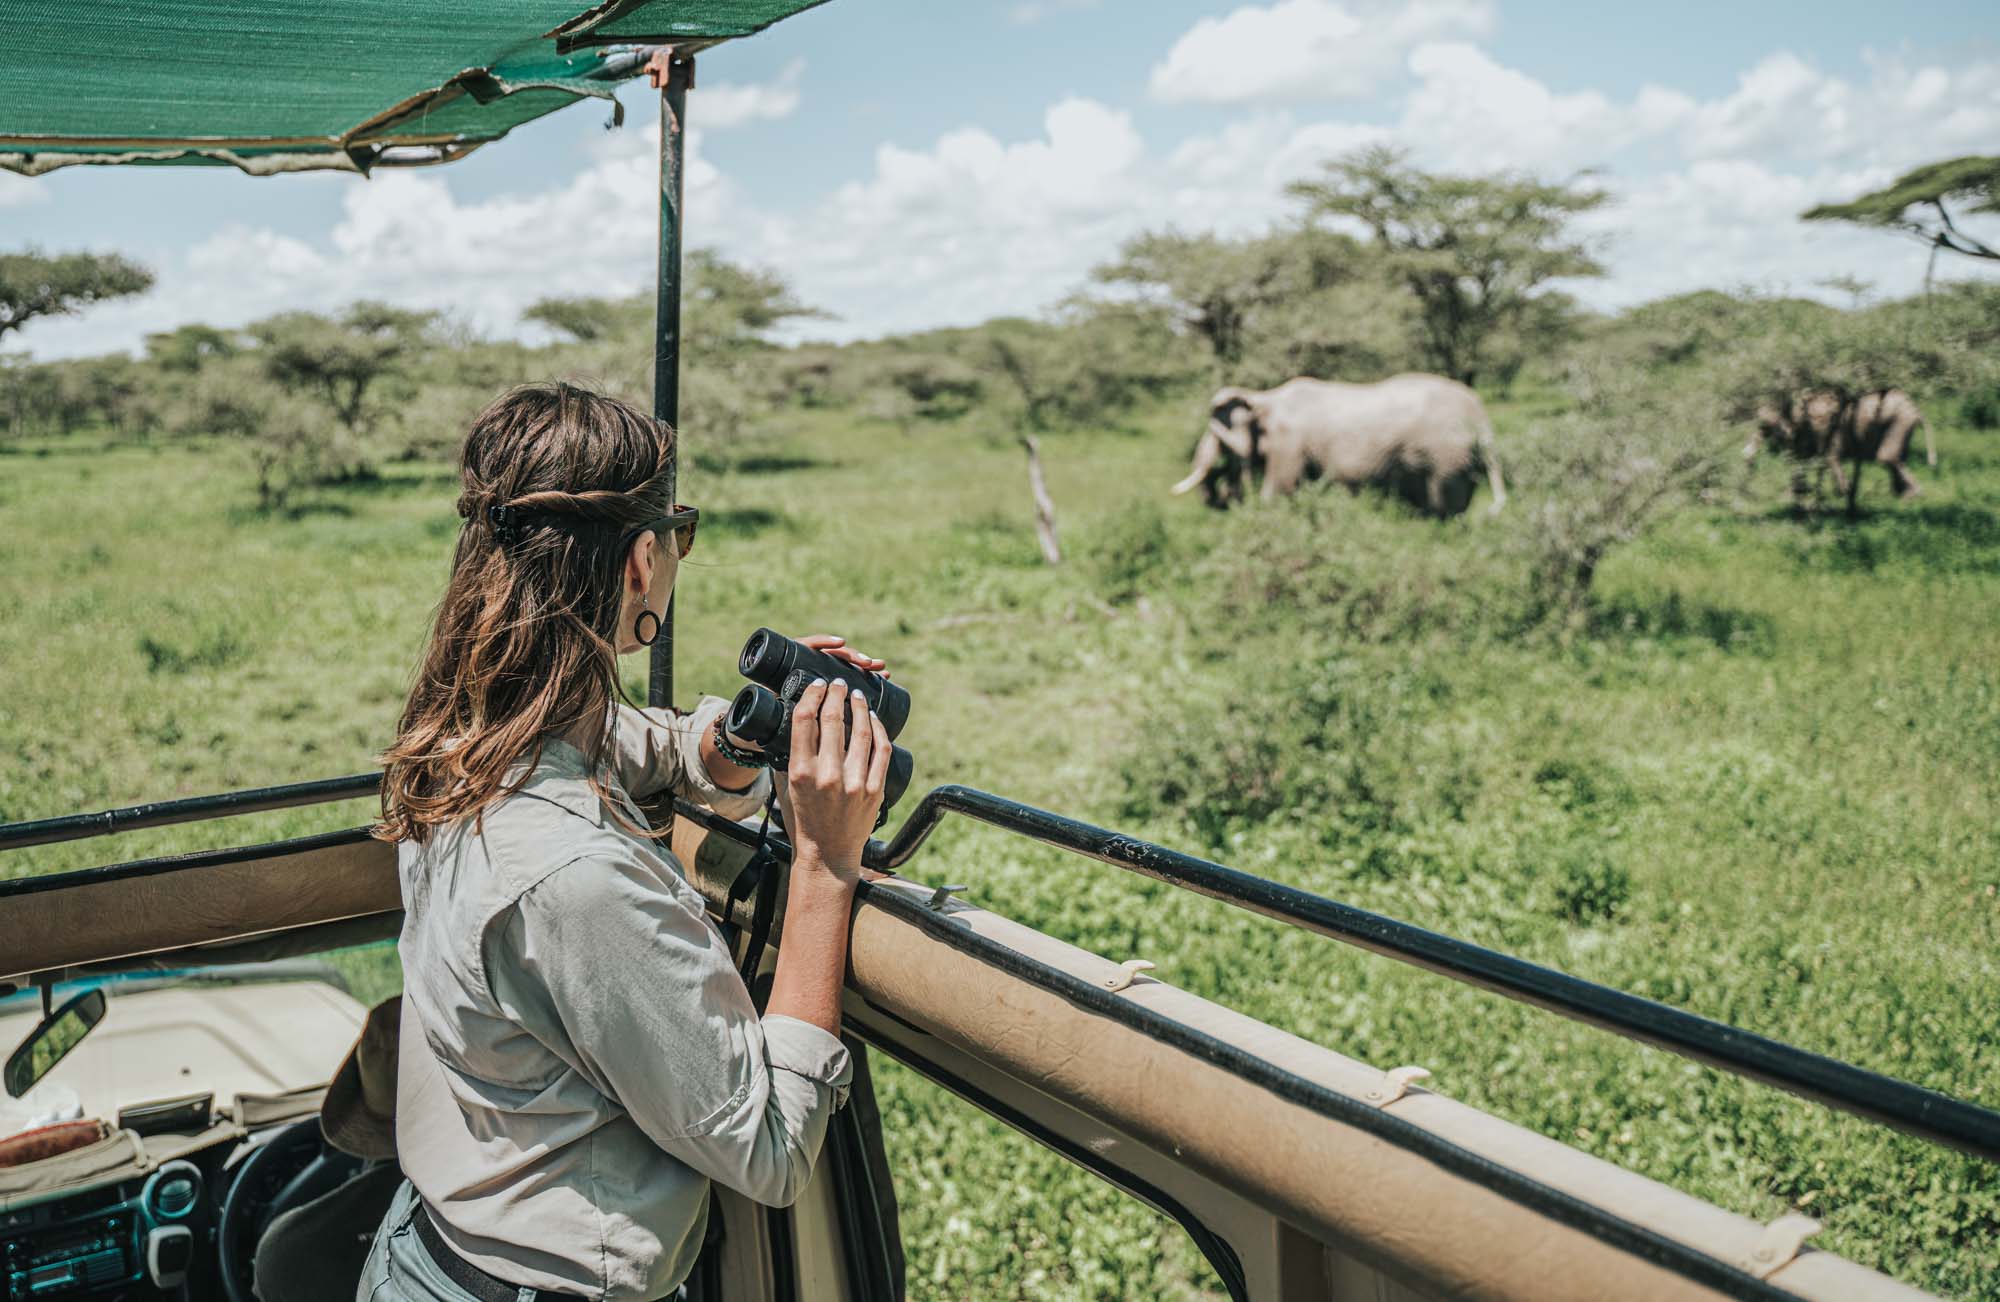 How to Plan a Responsible East Africa Safari